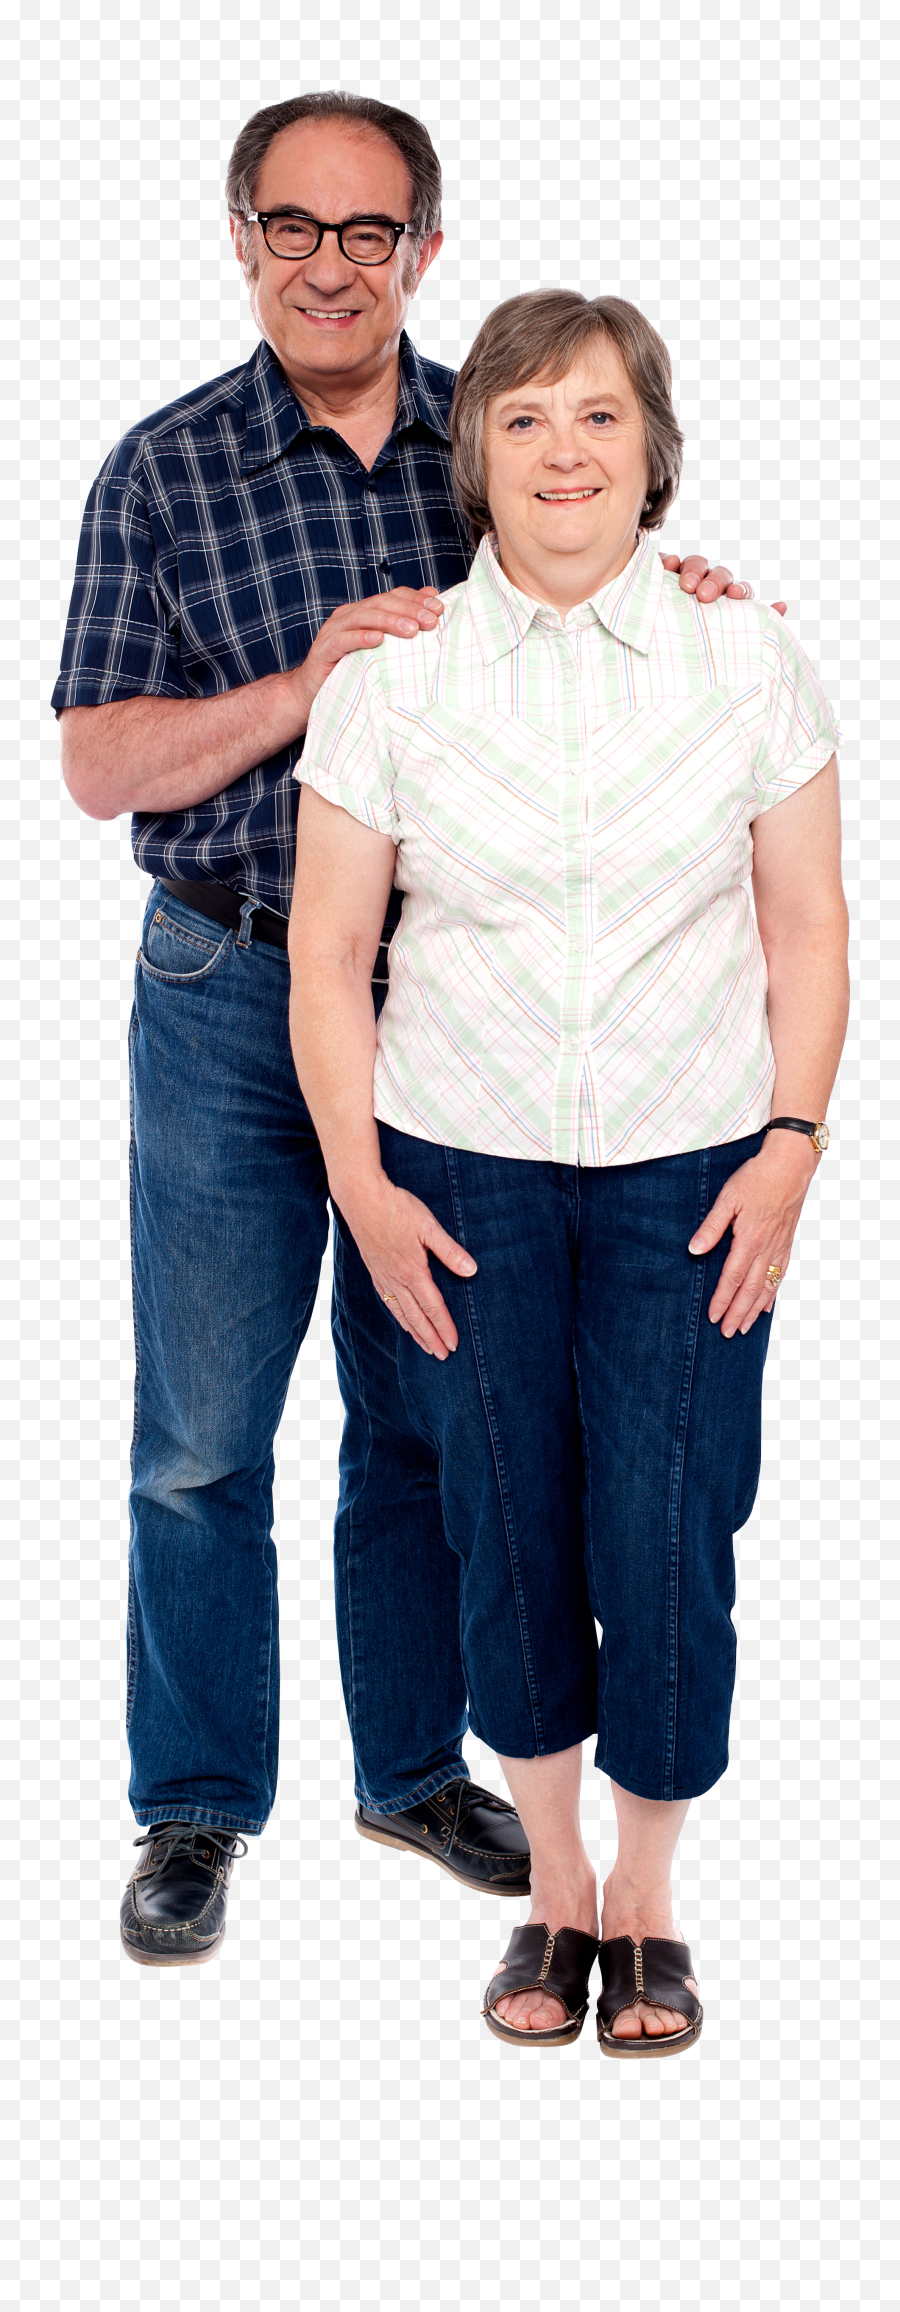 Old Couple Png Play - Portable Network Graphics,Couple Png